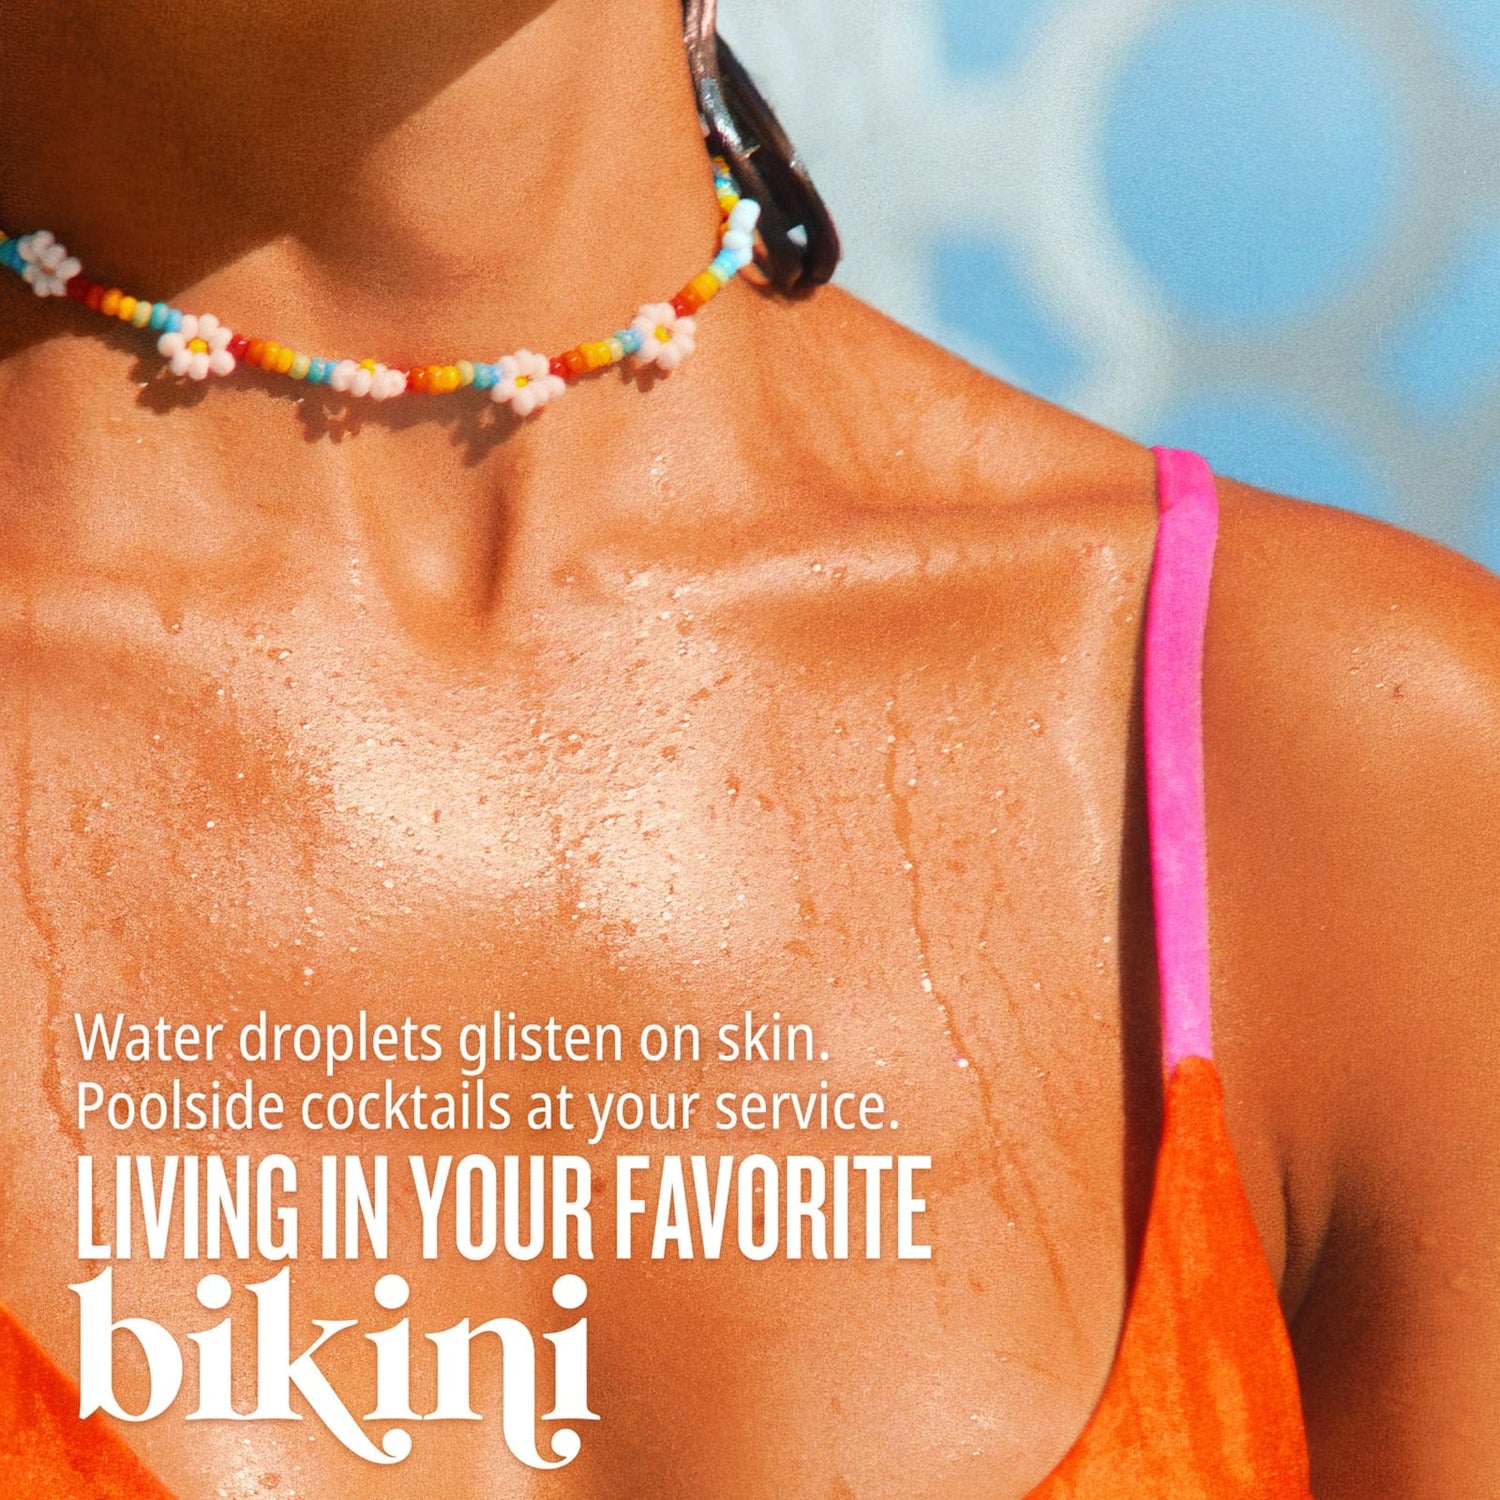 Water droplets glisten on skin. Poolside cocktails at your service. Living in your favorite bikini.